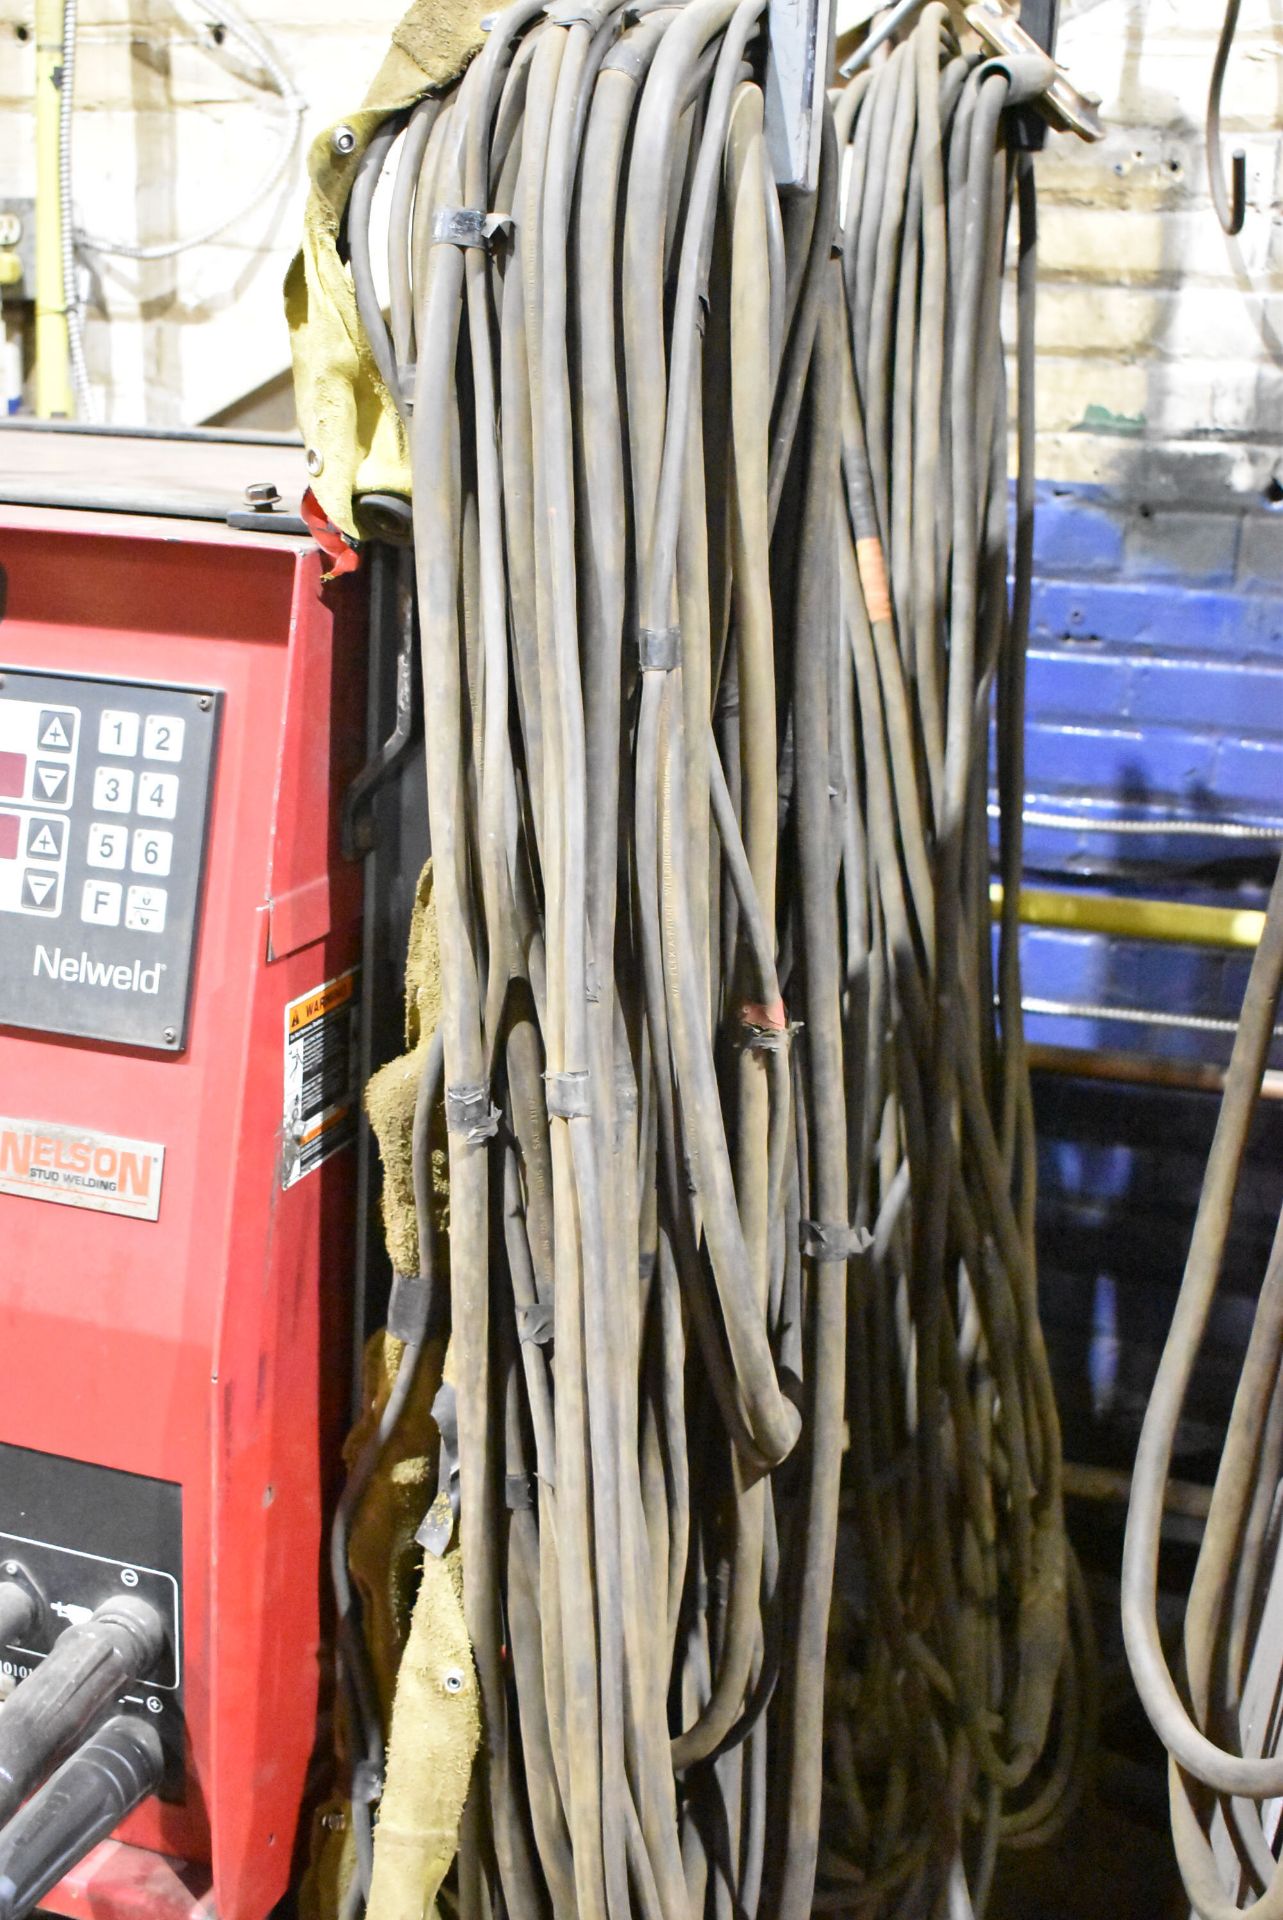 NELSON NELWELD 6000 TWIN STATION DIGITAL STUD WELDER WITH CABLES (NO GUN), S/N: N/A (CI) [RIGGING - Image 3 of 4